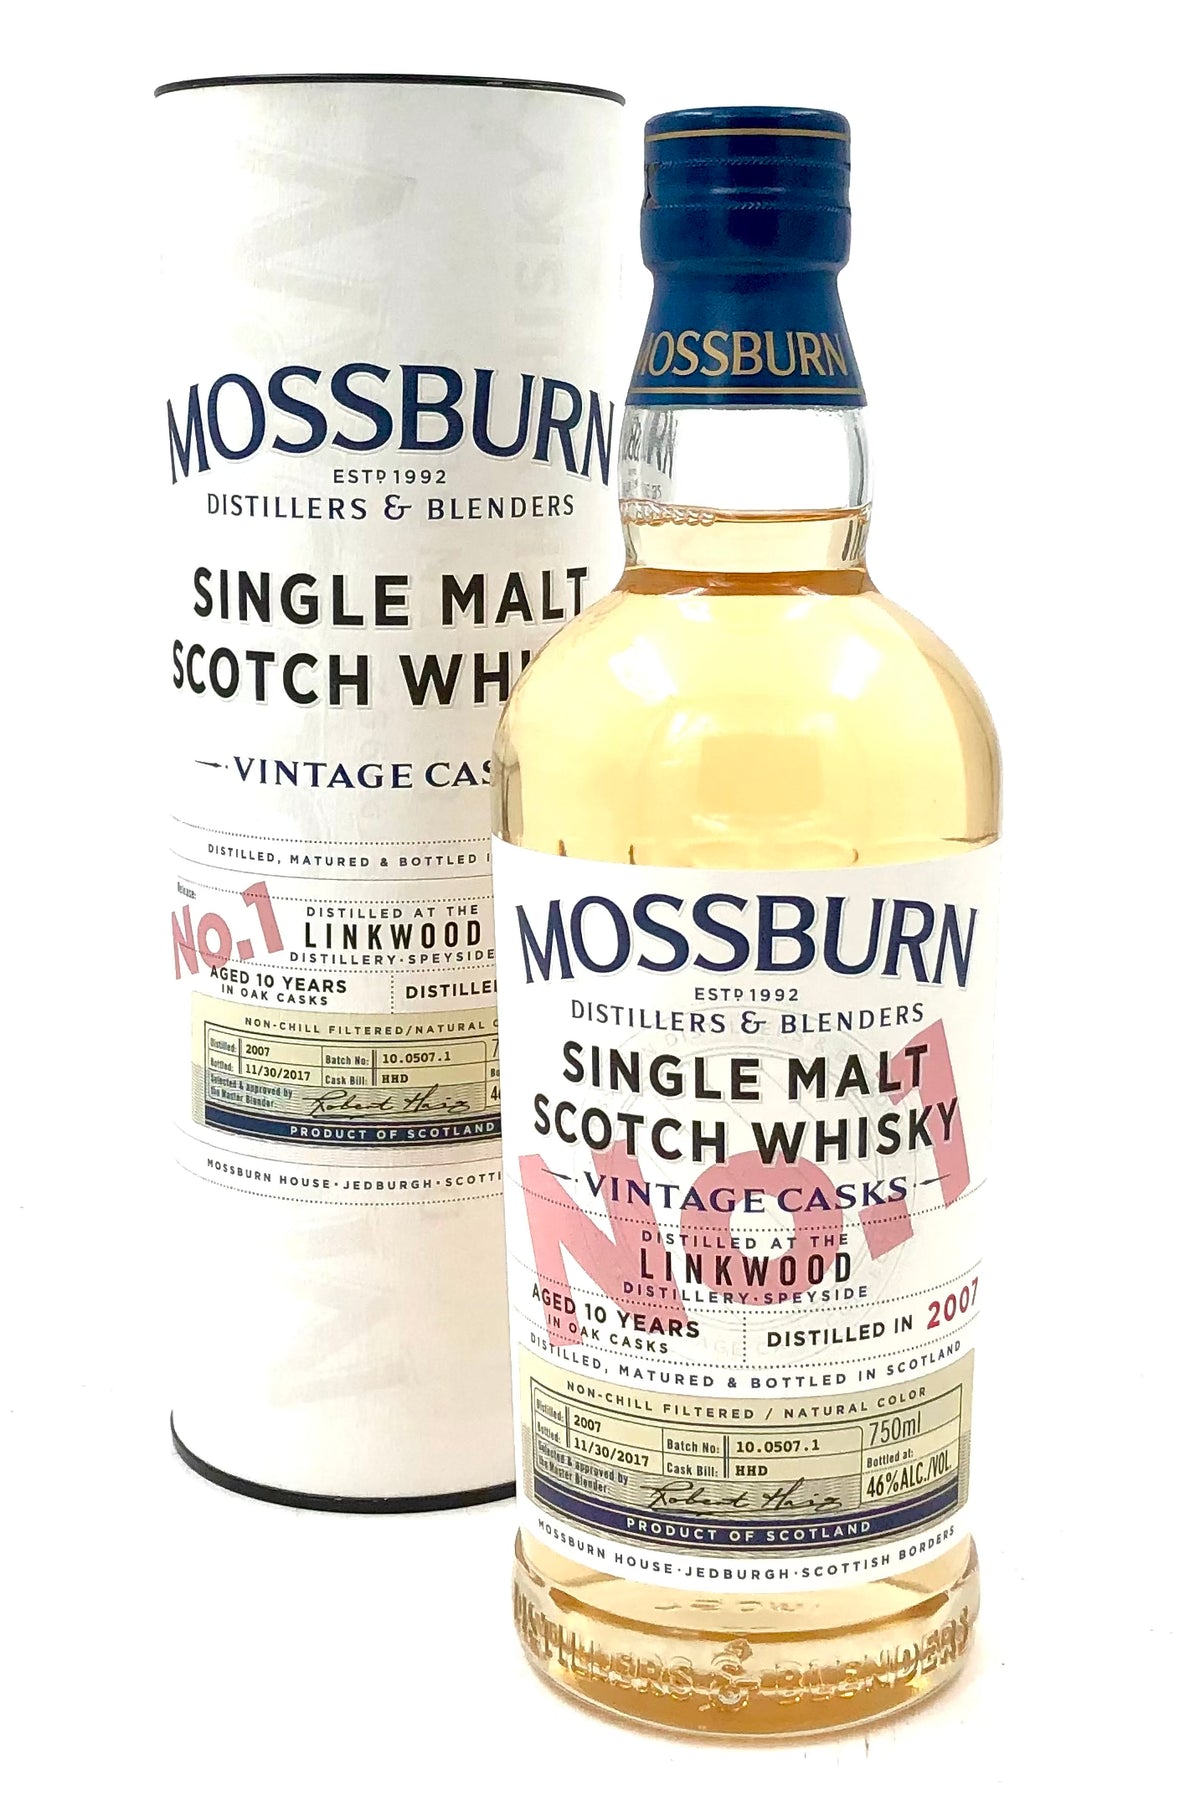 Linkwood 10 Years Old No. 1 Scotch Whisky by Mossburn Distillers